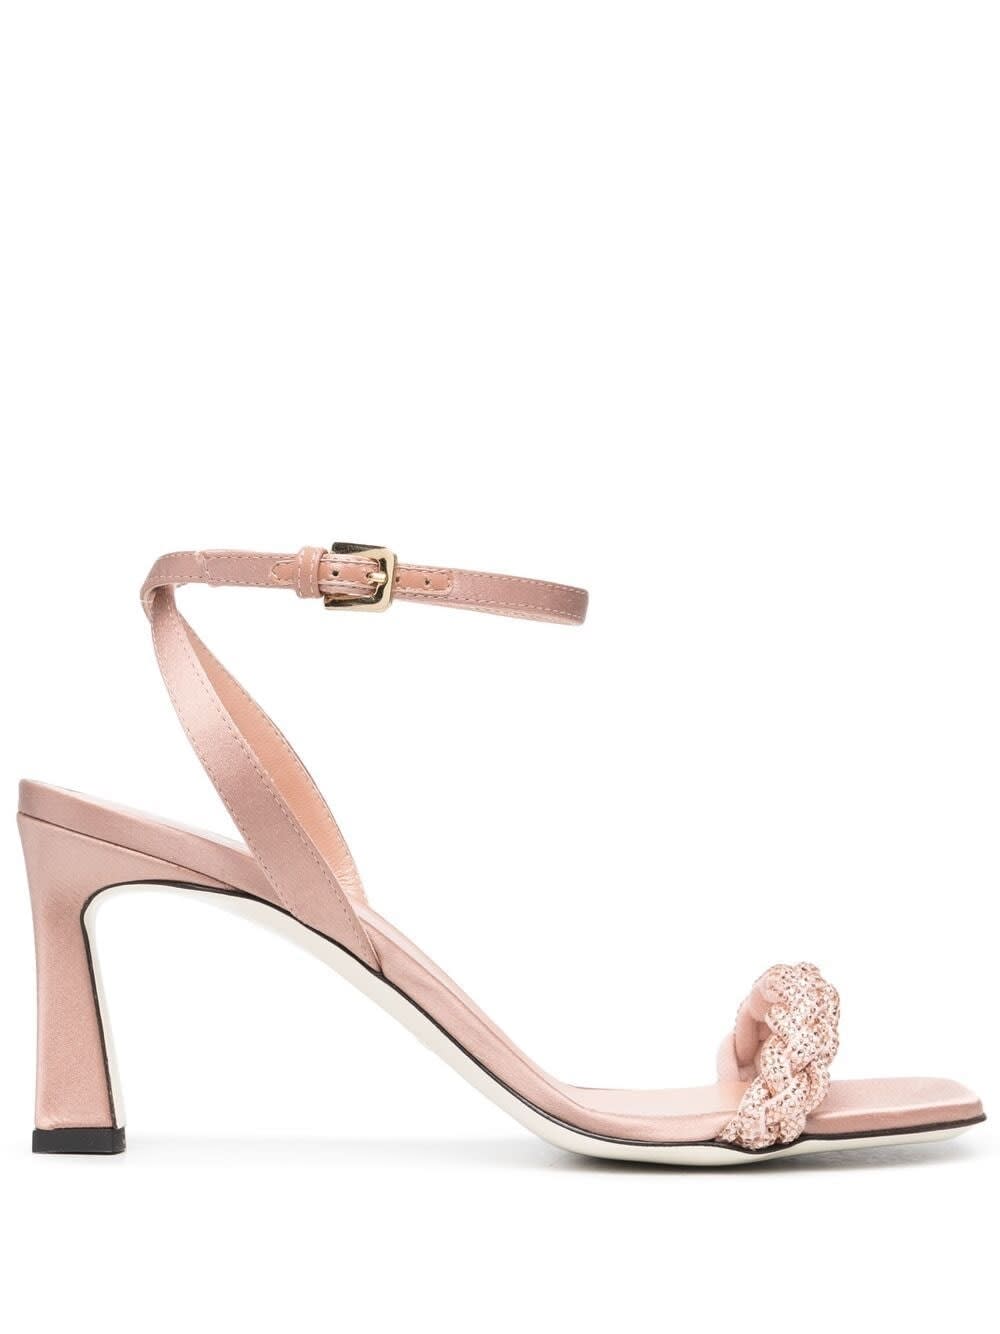 Pollini PINK SATIN SANDALS WITH BRAIDED BAND